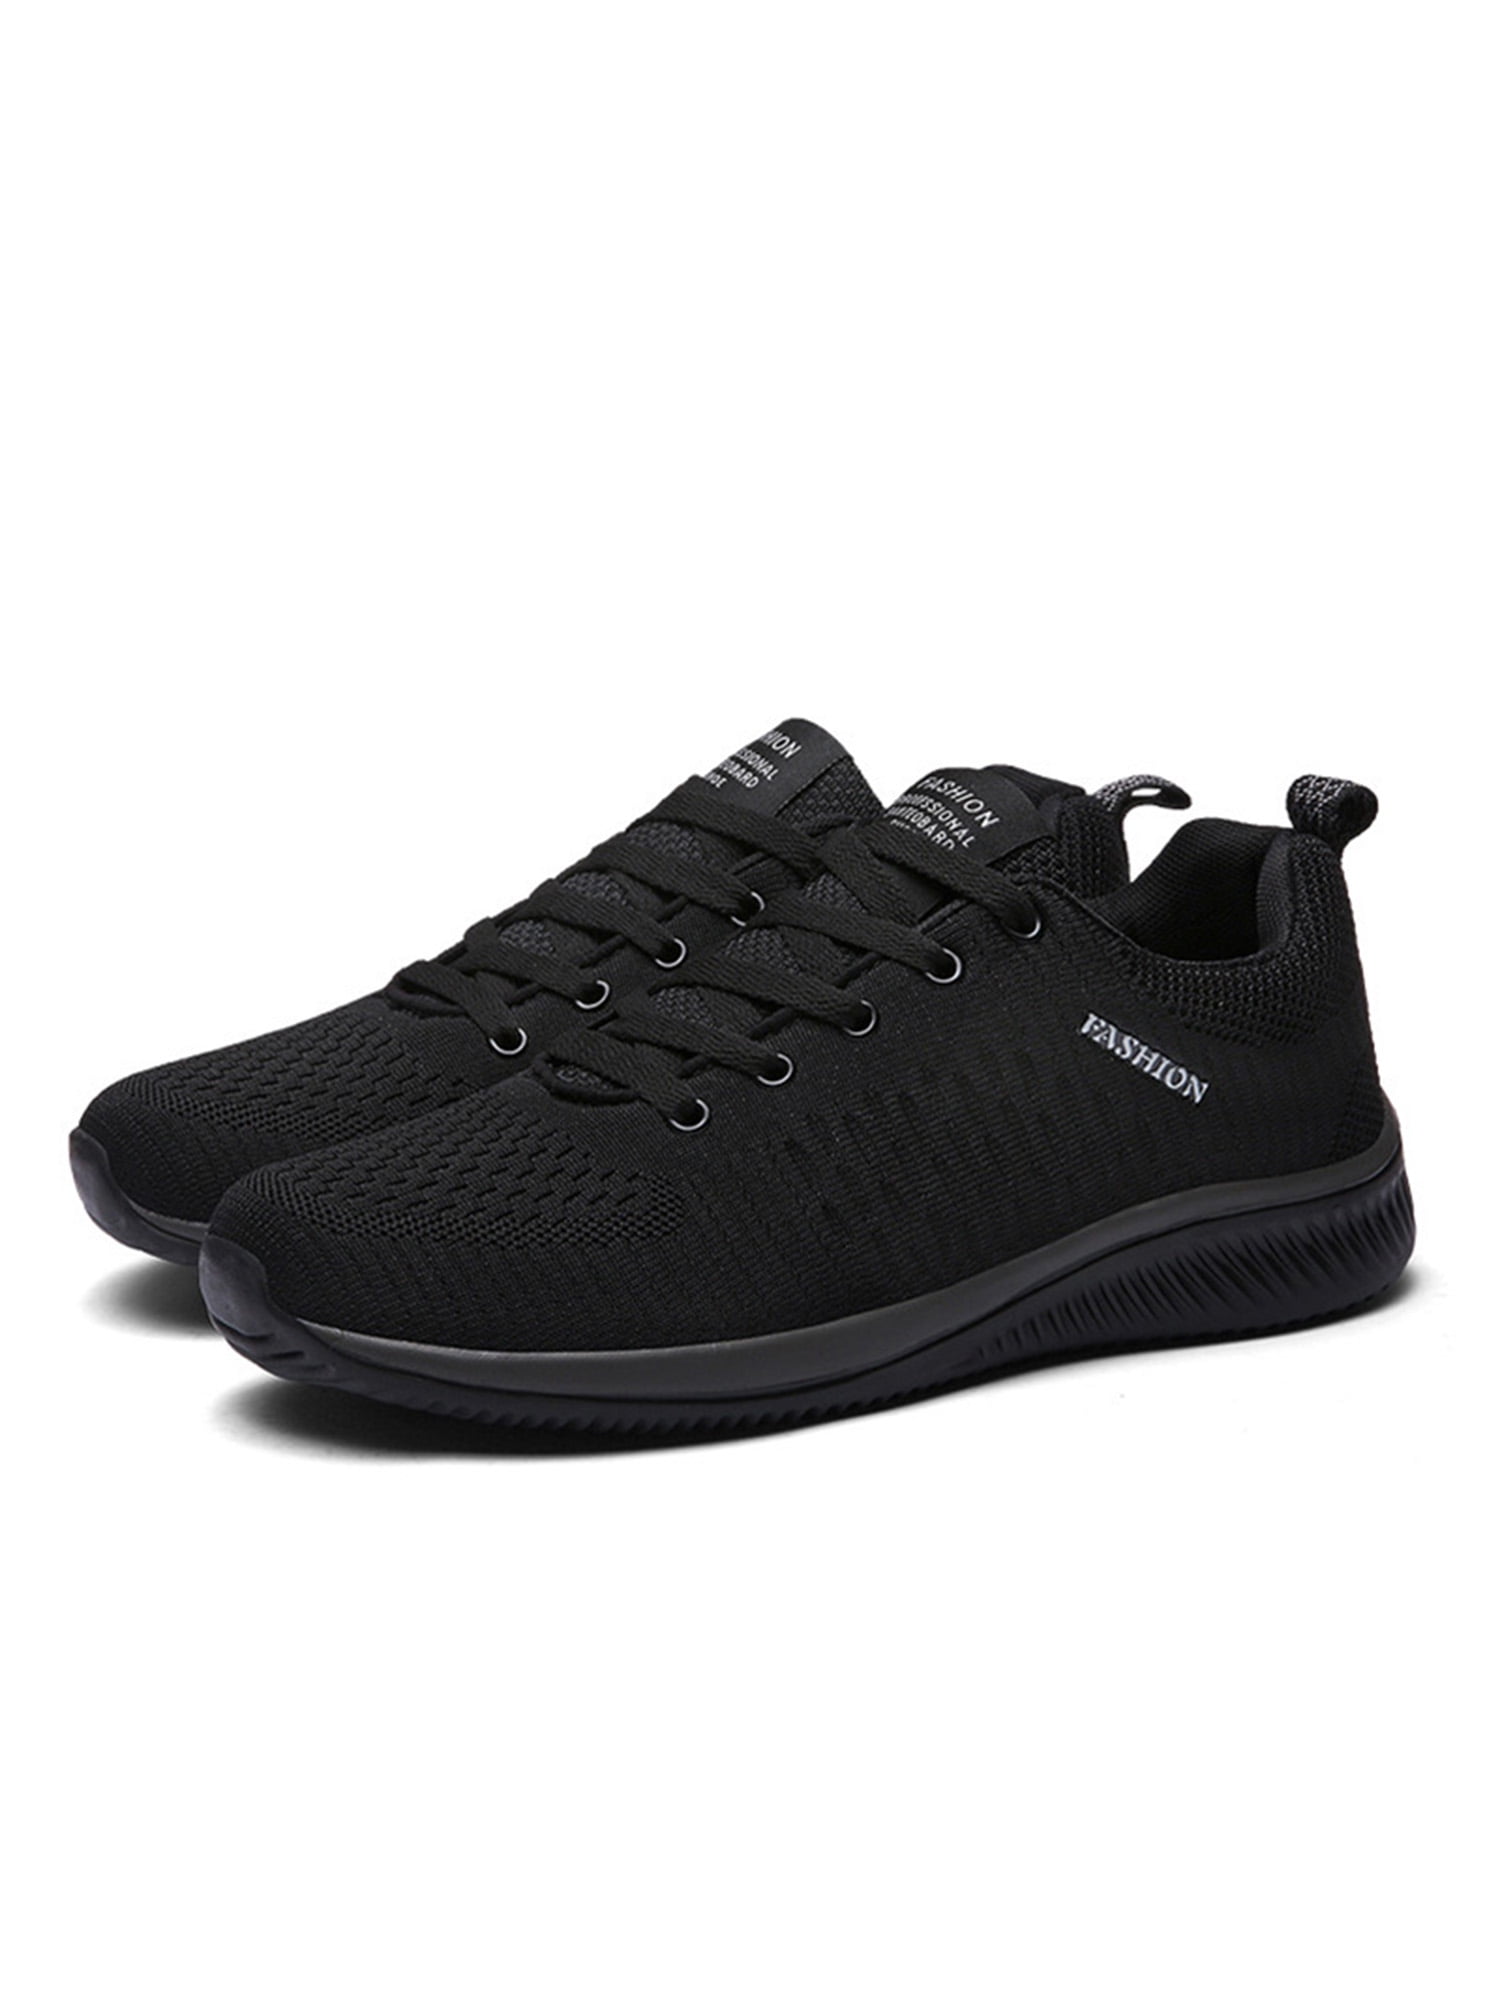 Harsuny Mens Running Lightweight Casual Sneaker Non-Slip Knit Sneakers ...